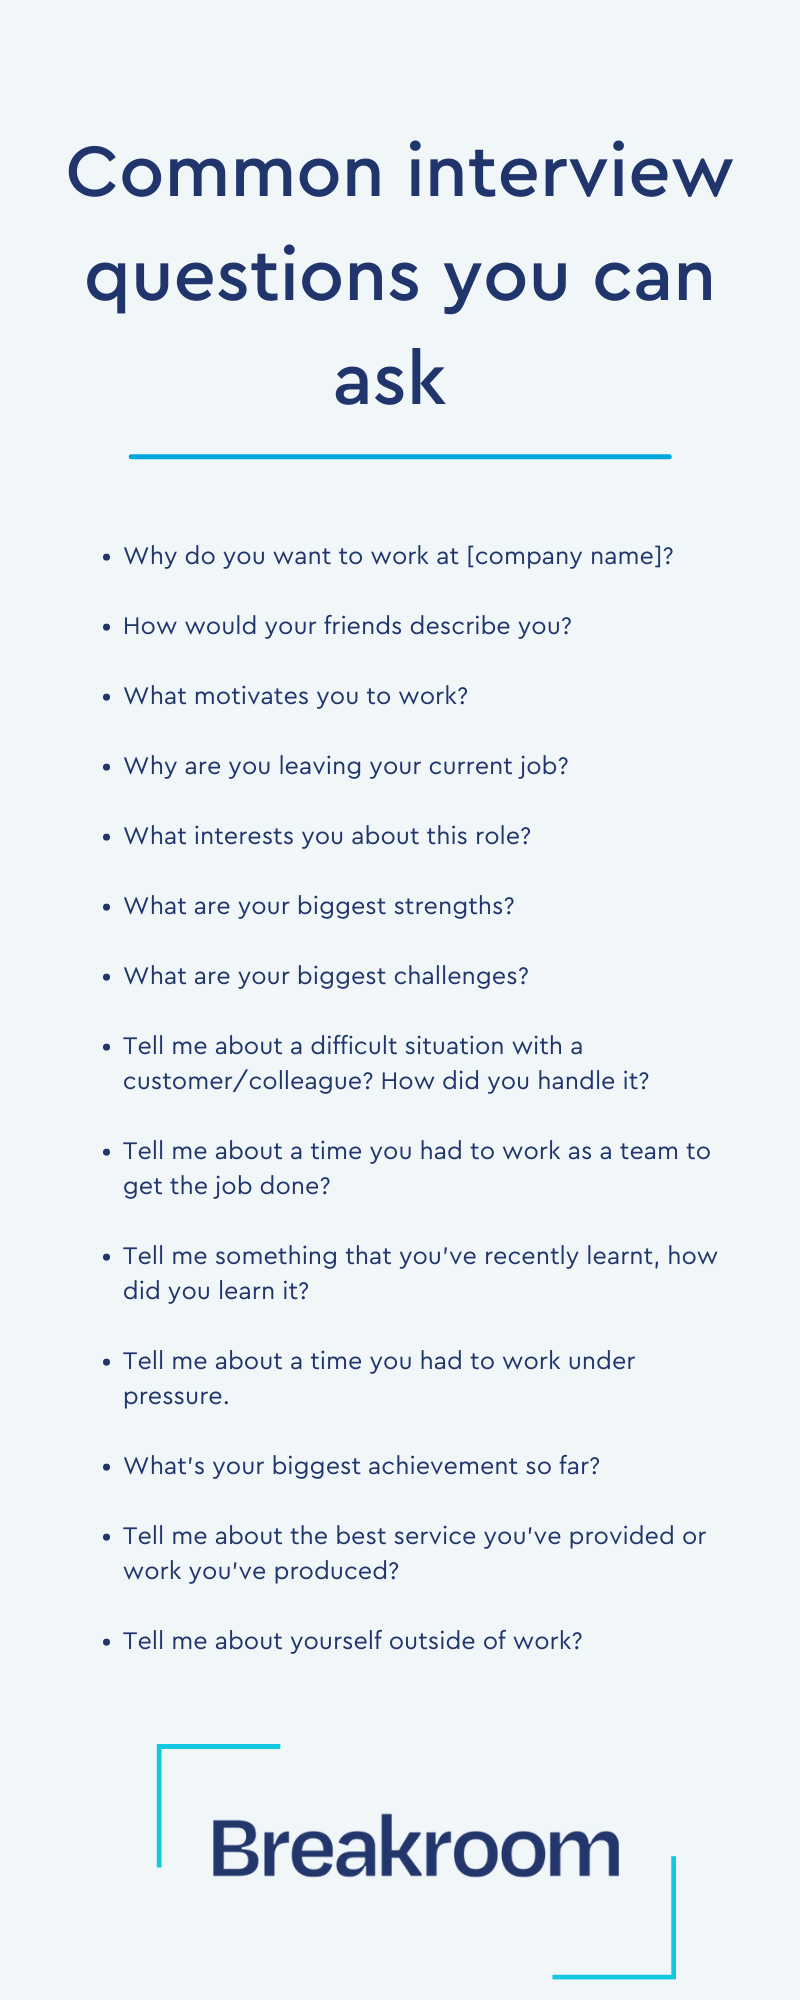 Competency-based interview questions (3)